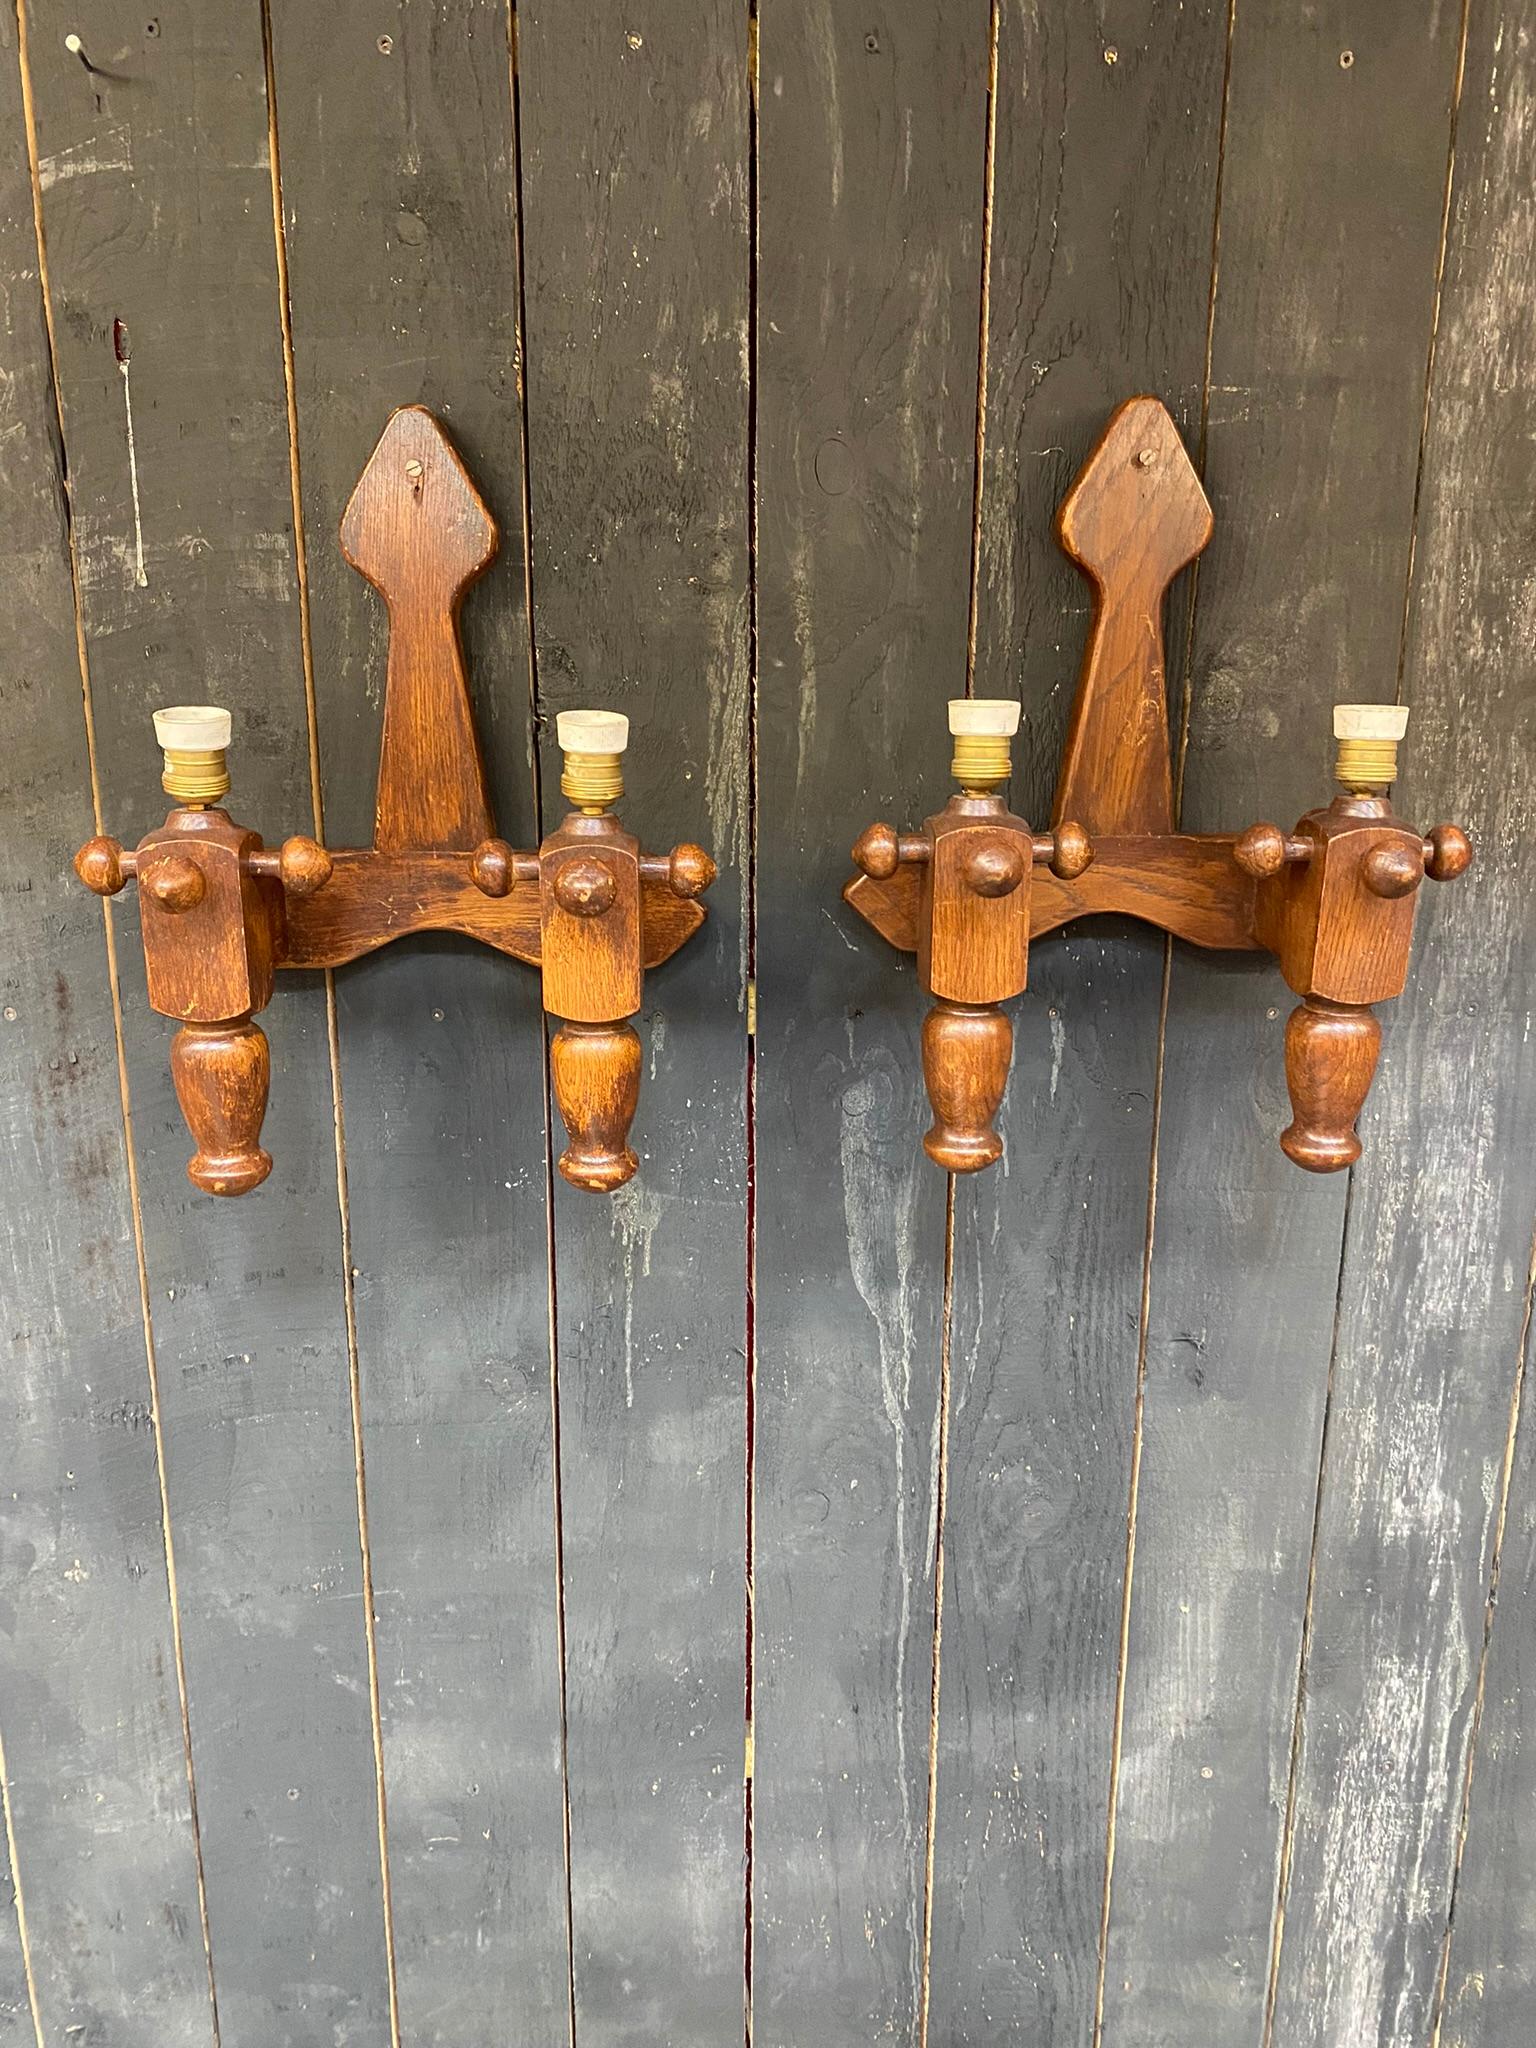 Guillerme et Chambron 4 wall sconces en chene, edition Votre Maison, circa 1970.
price is for one
4 are available.